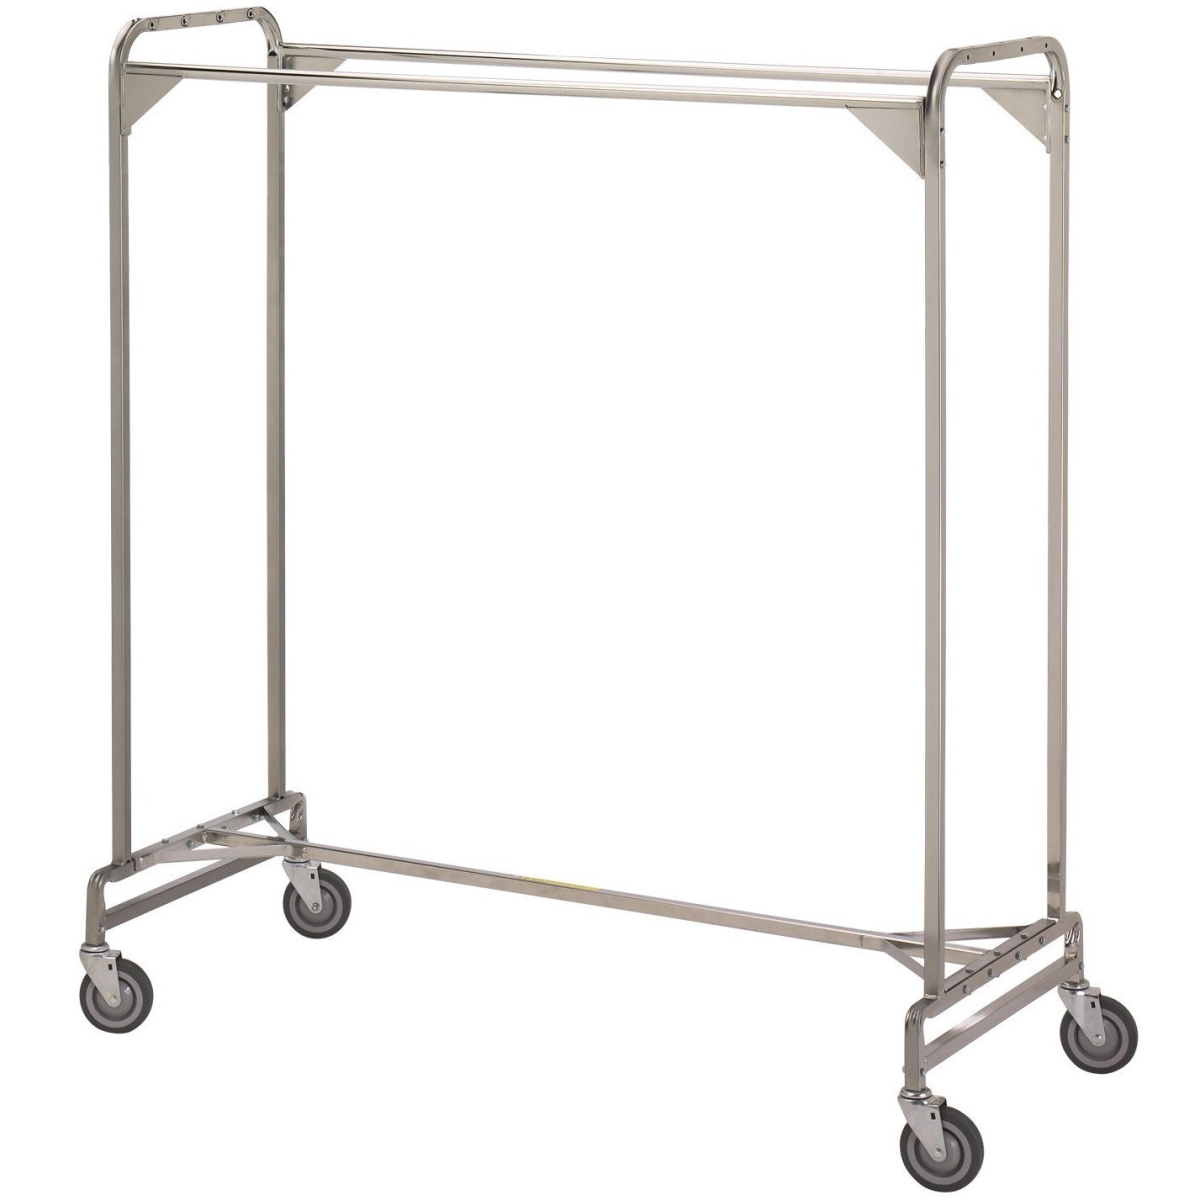 R & B Wire Cover Kit For 725 Garment Rack